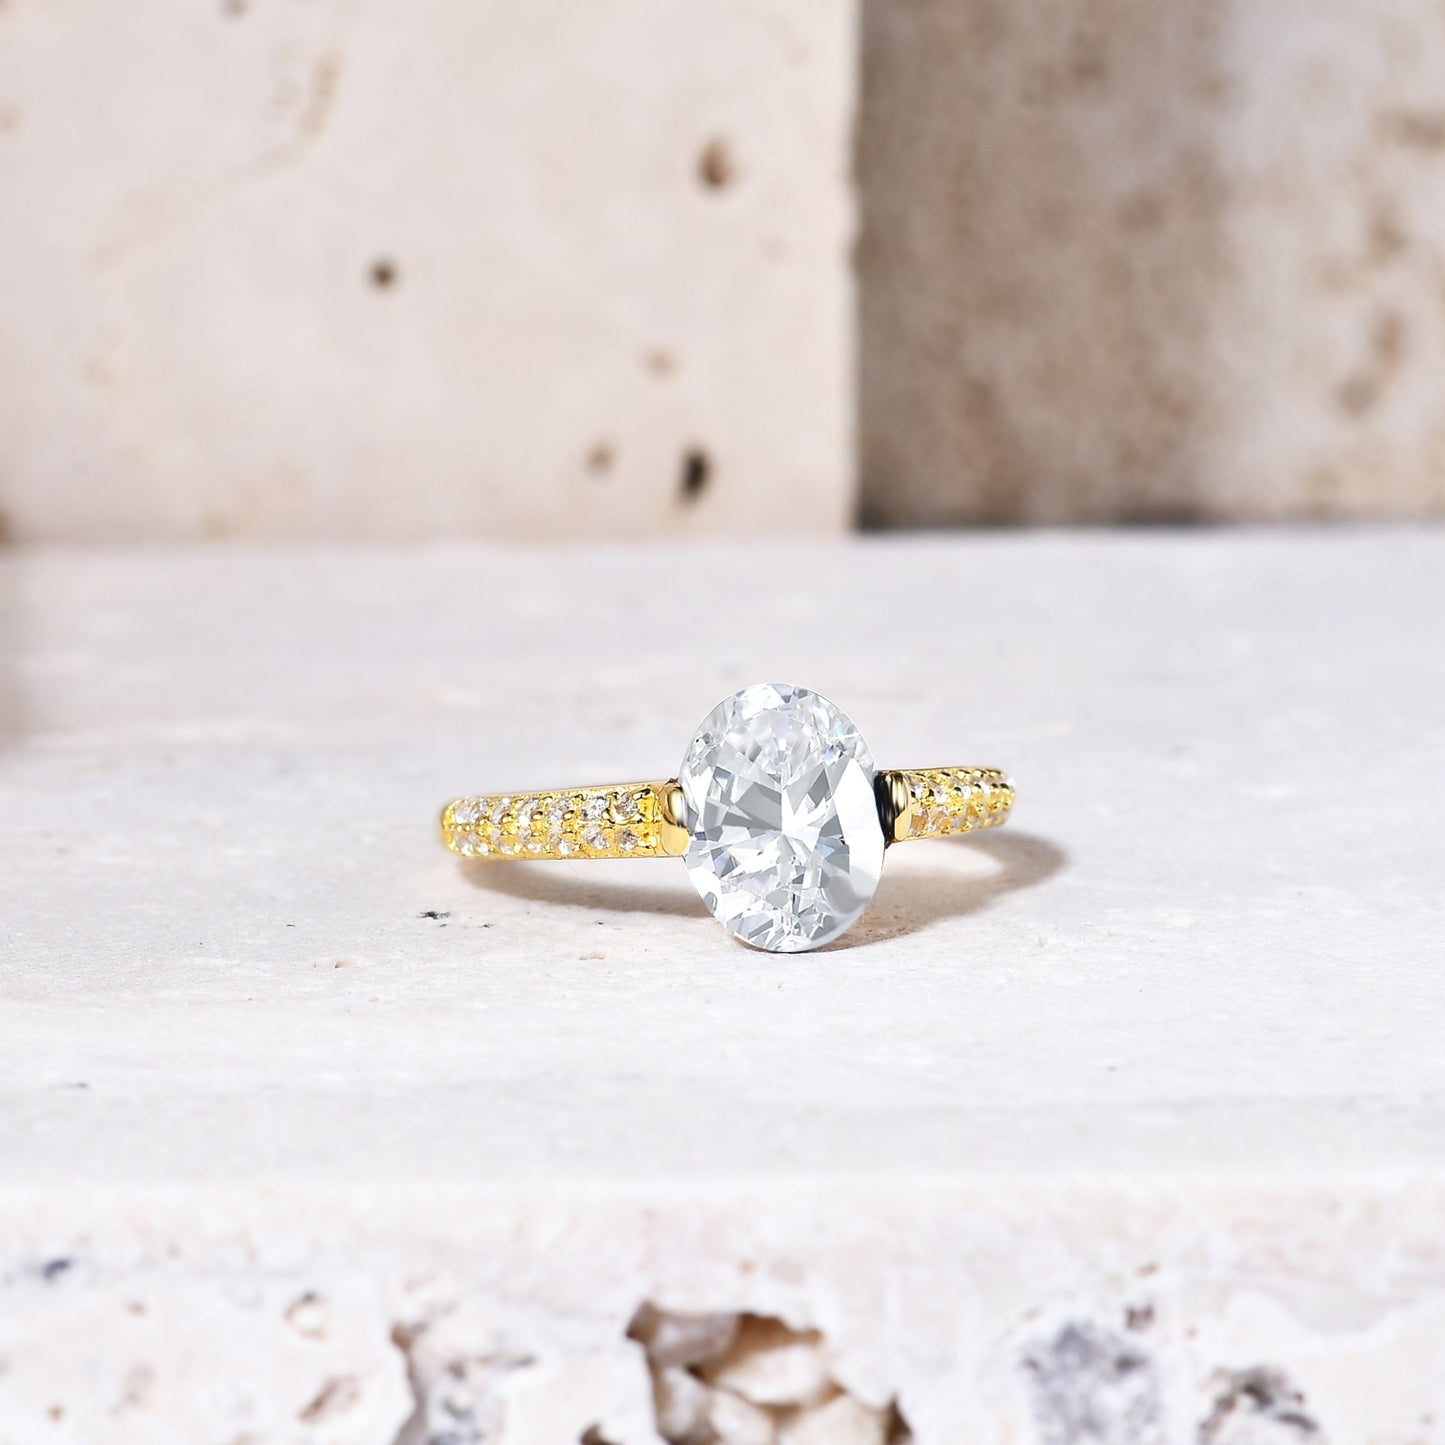 A gold tension set ring with a oval moissanite and double row pave band.